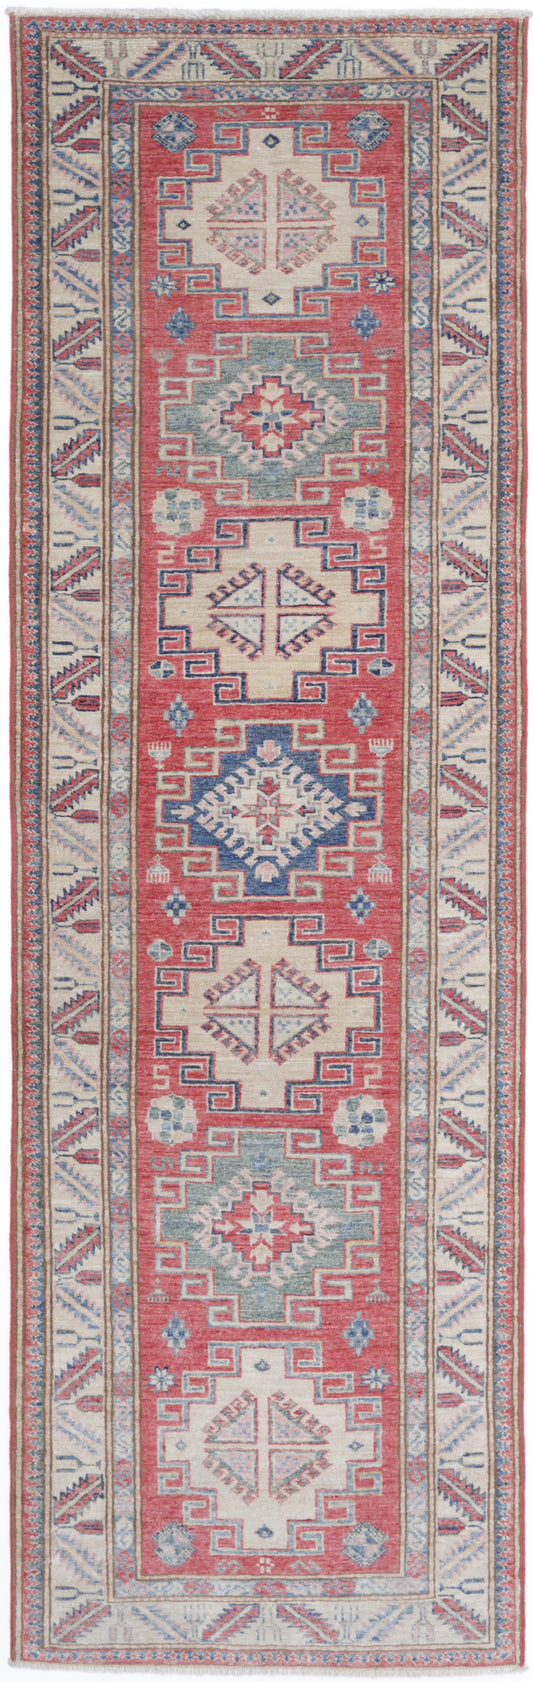 Tribal Hand Knotted Kazak Super Kazak Wool Rug of Size 2'7'' X 8'10'' in Peach and Ivory Colors - Made in Afghanistan